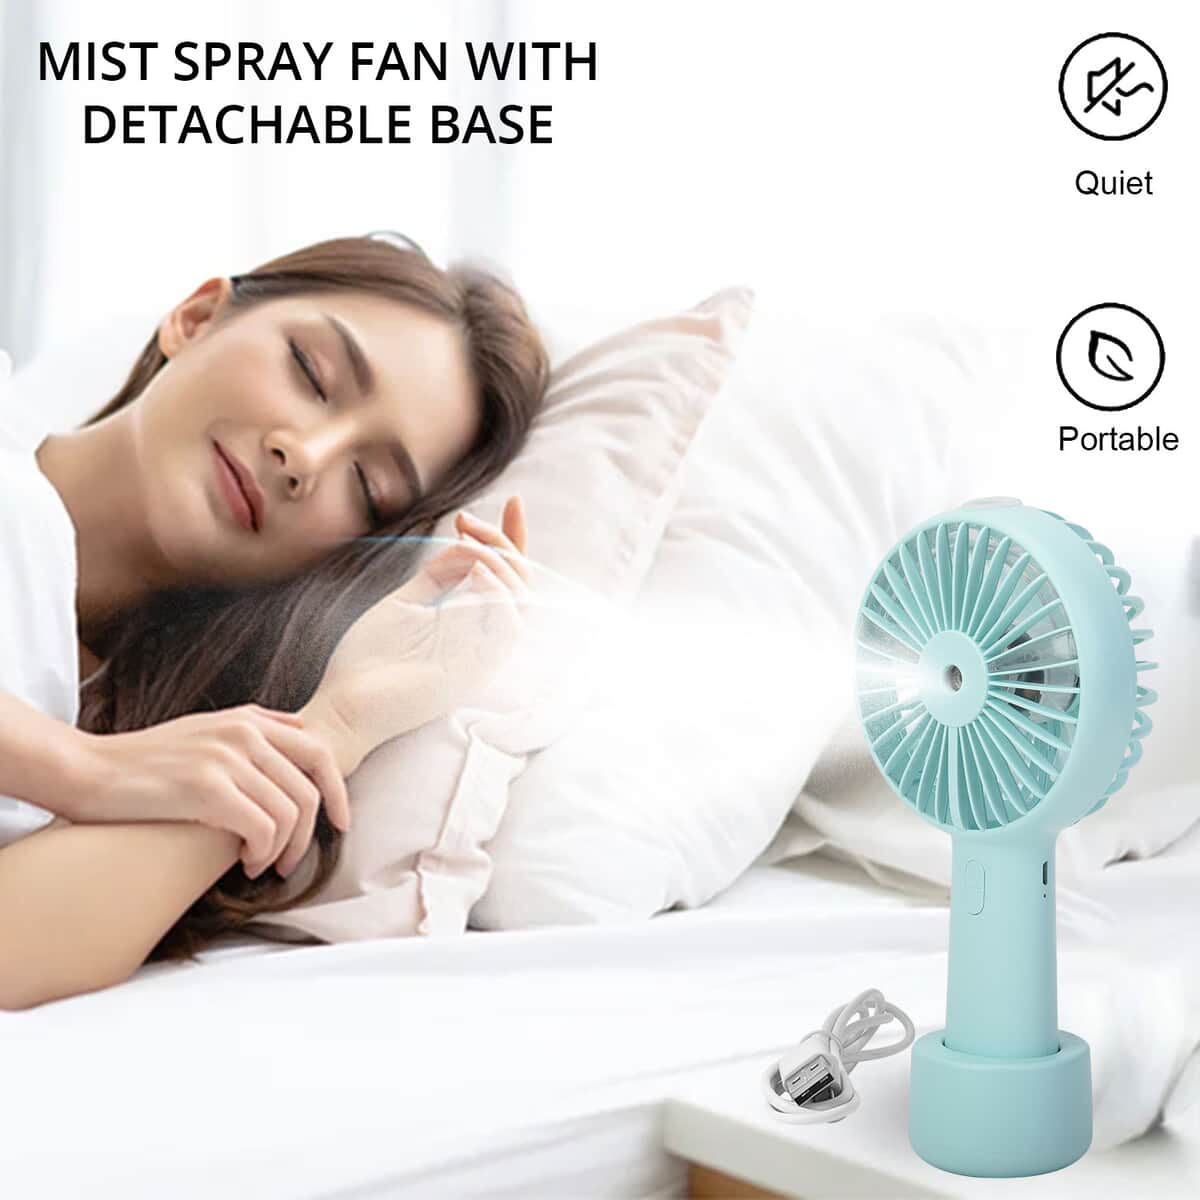 Blue 2 in 1 Mist Spray Fan with Detachable Base image number 1